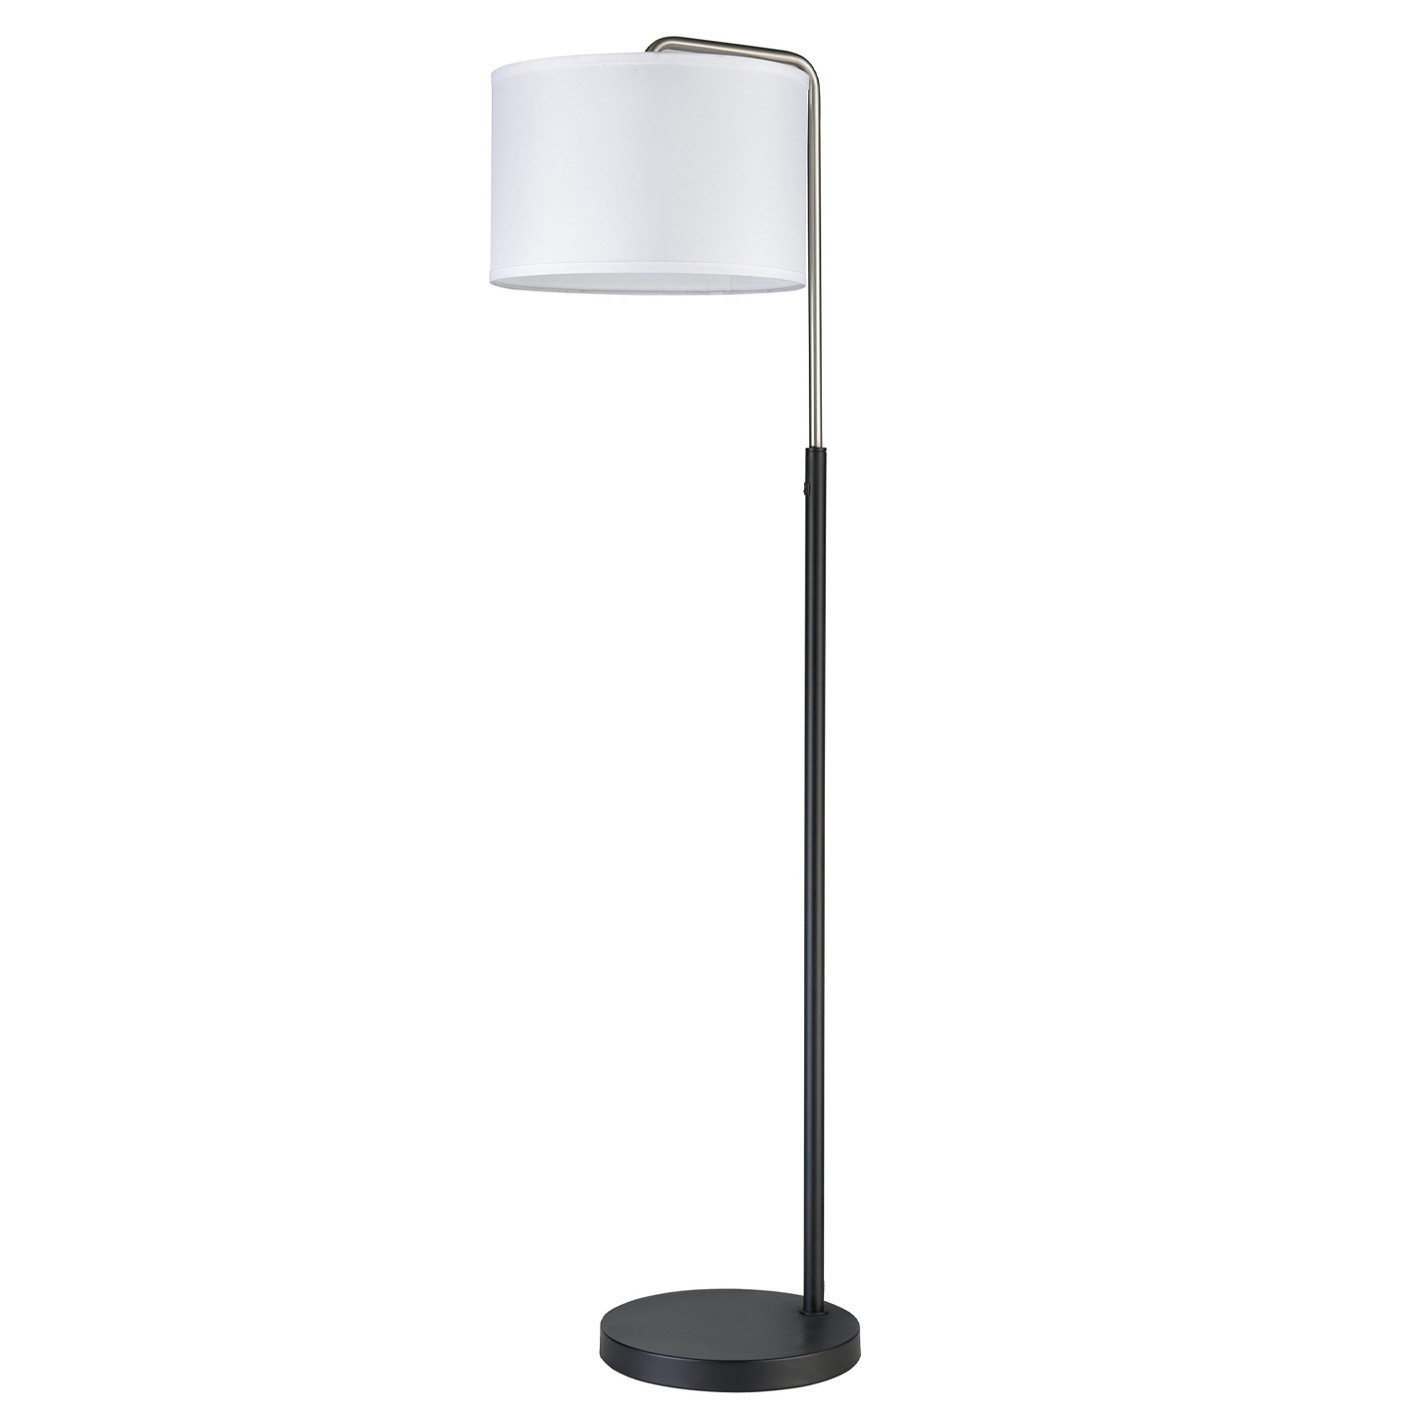 Floor Lamp Brushed Nickel Powder Coated Matte Black With One Switch